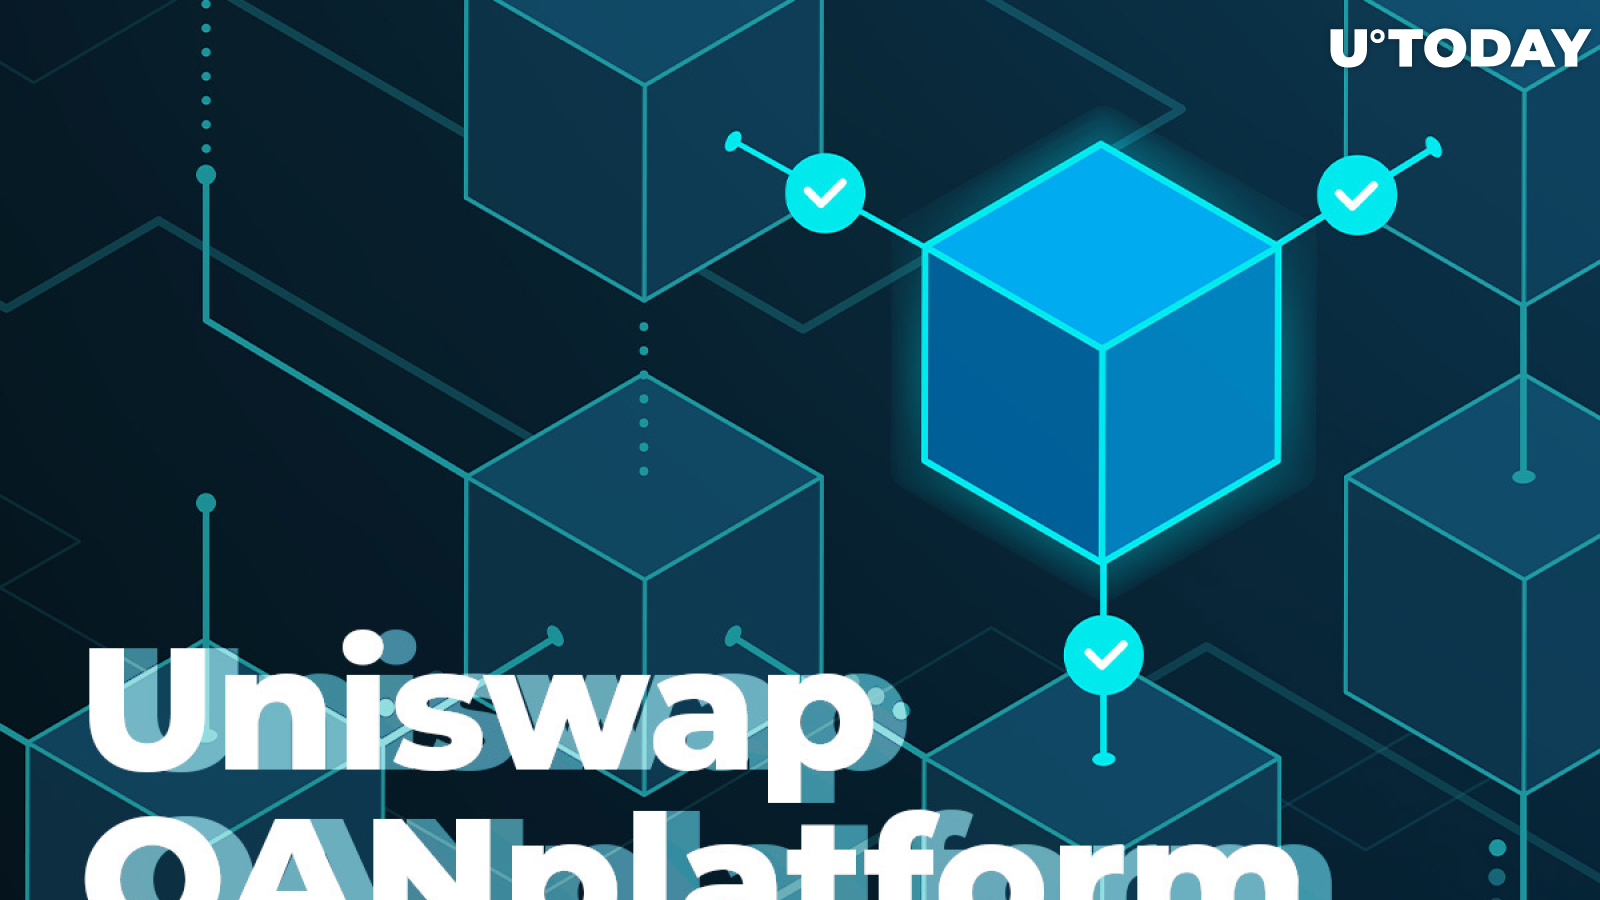 Uniswap (UNI) to On-Board QANplatform Tokens on May 21. The Project Raised $2.1M from VCs